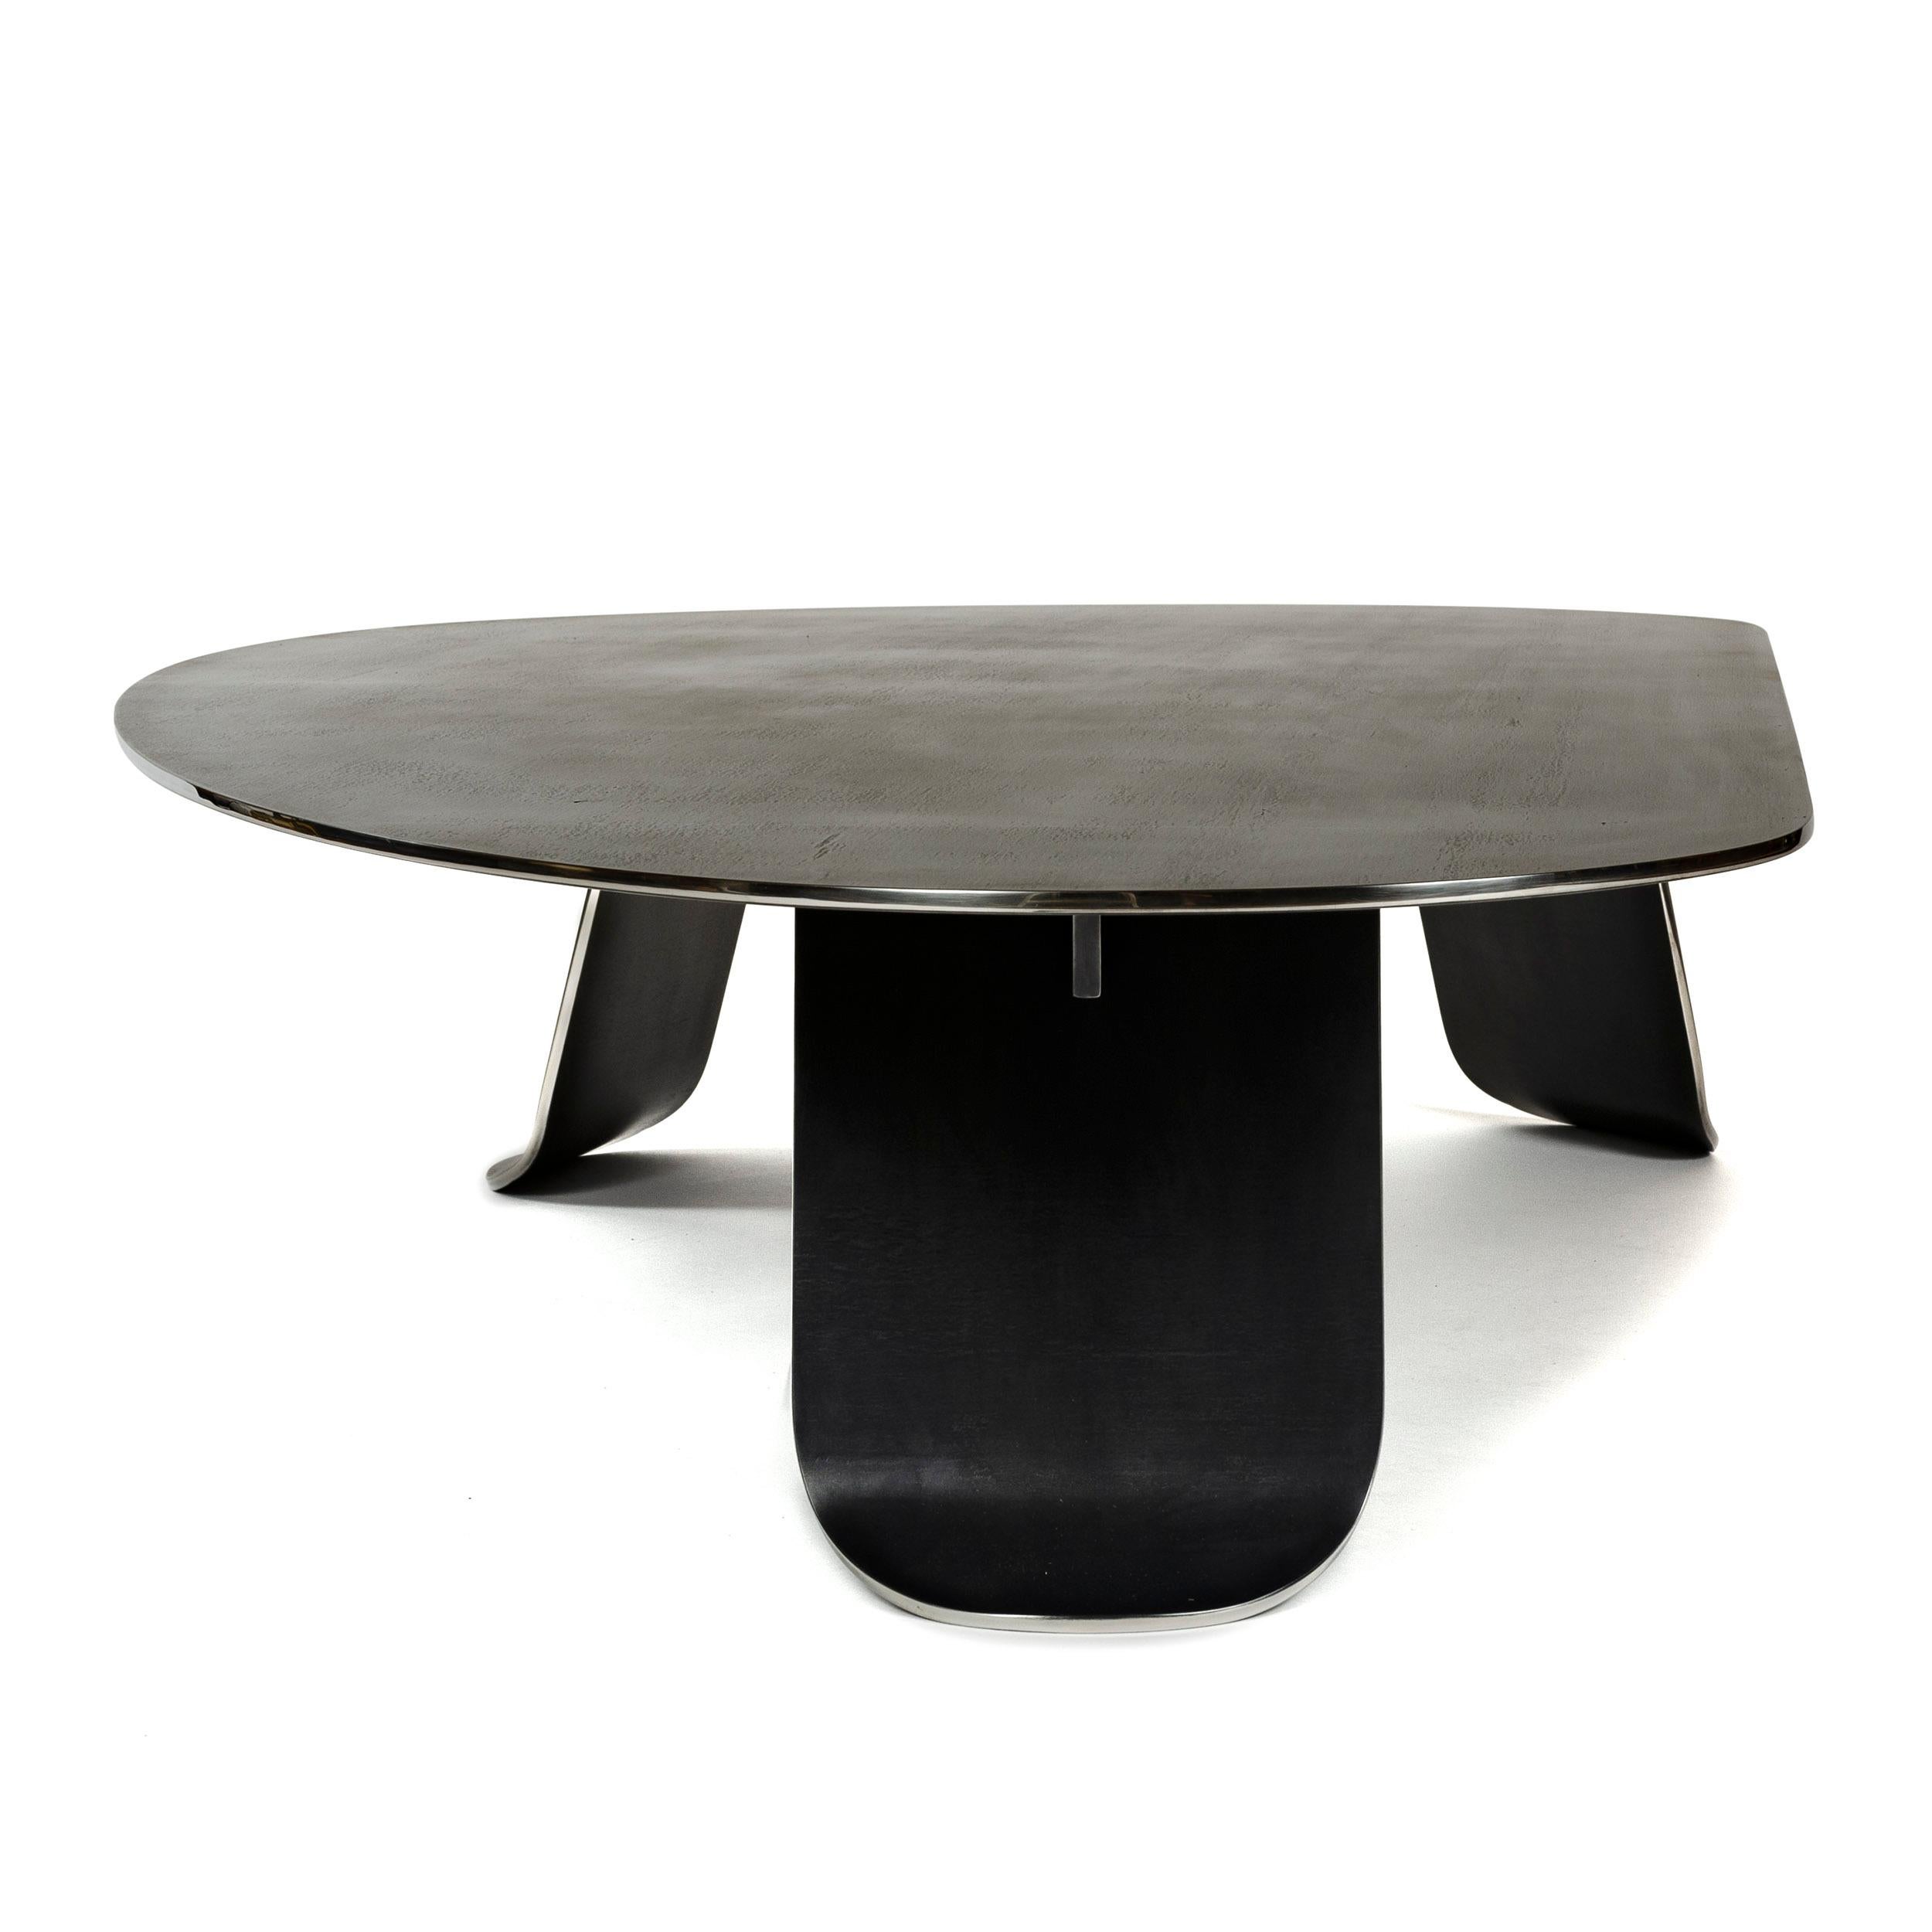 Wyeth Chrysalis Table No. 1 in Blackened Stainless Steel with Polished Edges In New Condition For Sale In Sagaponack, NY